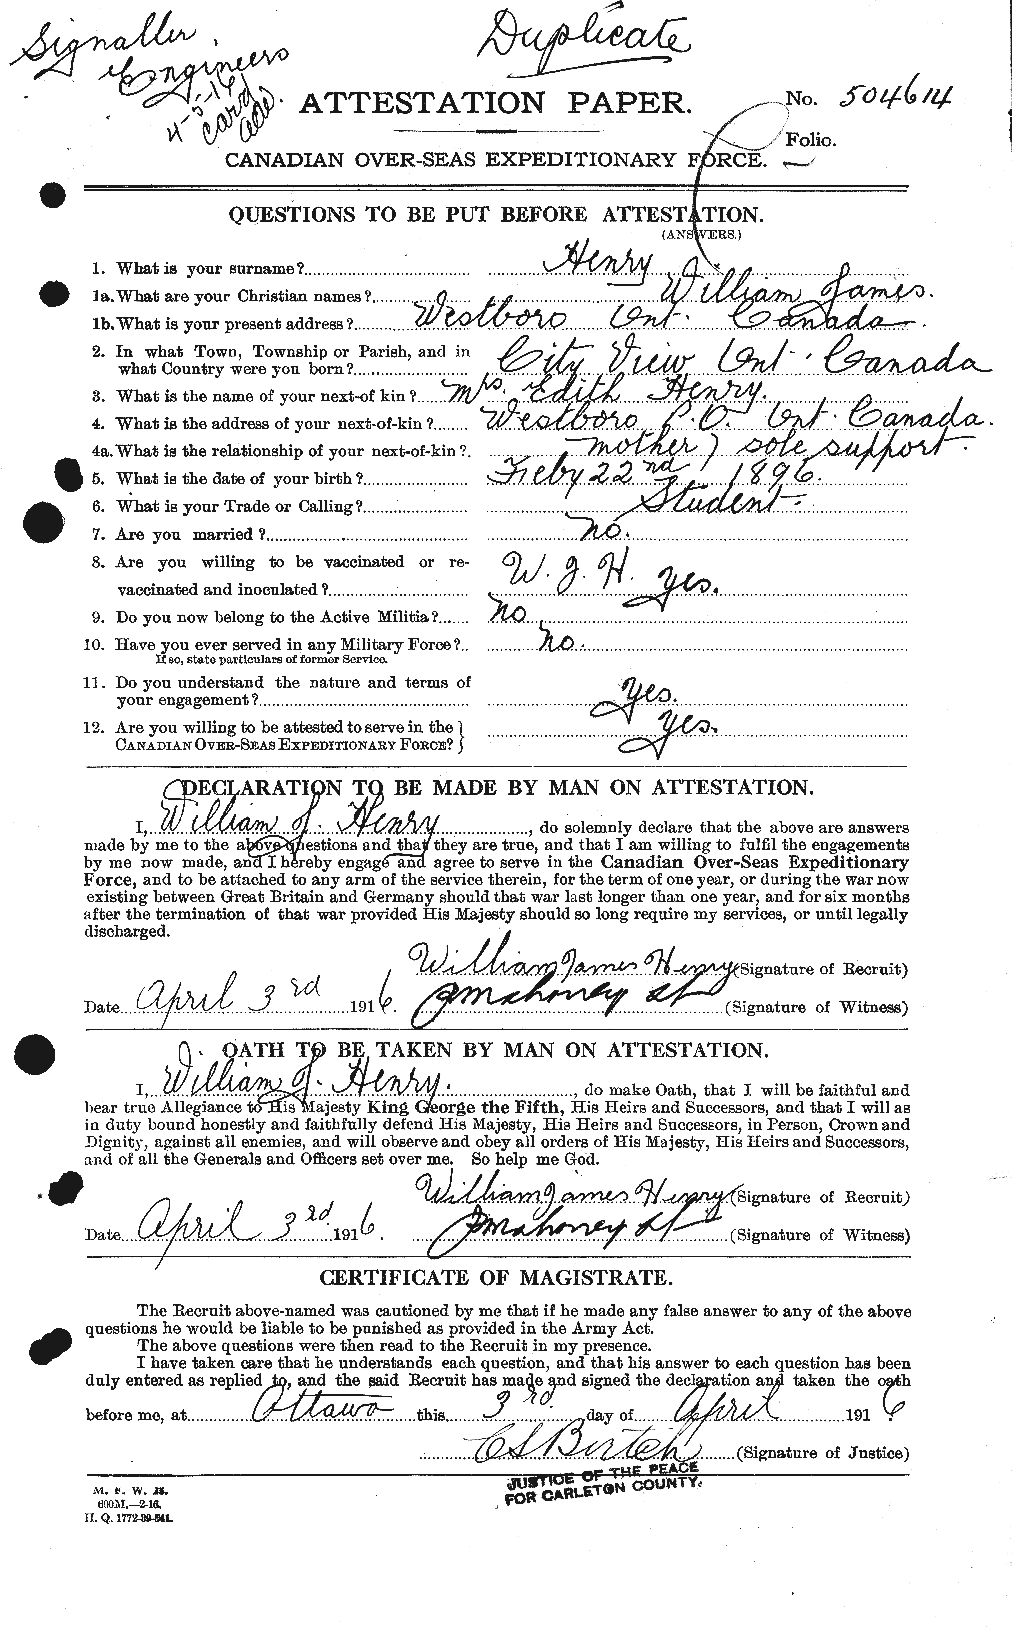 Personnel Records of the First World War - CEF 387779a